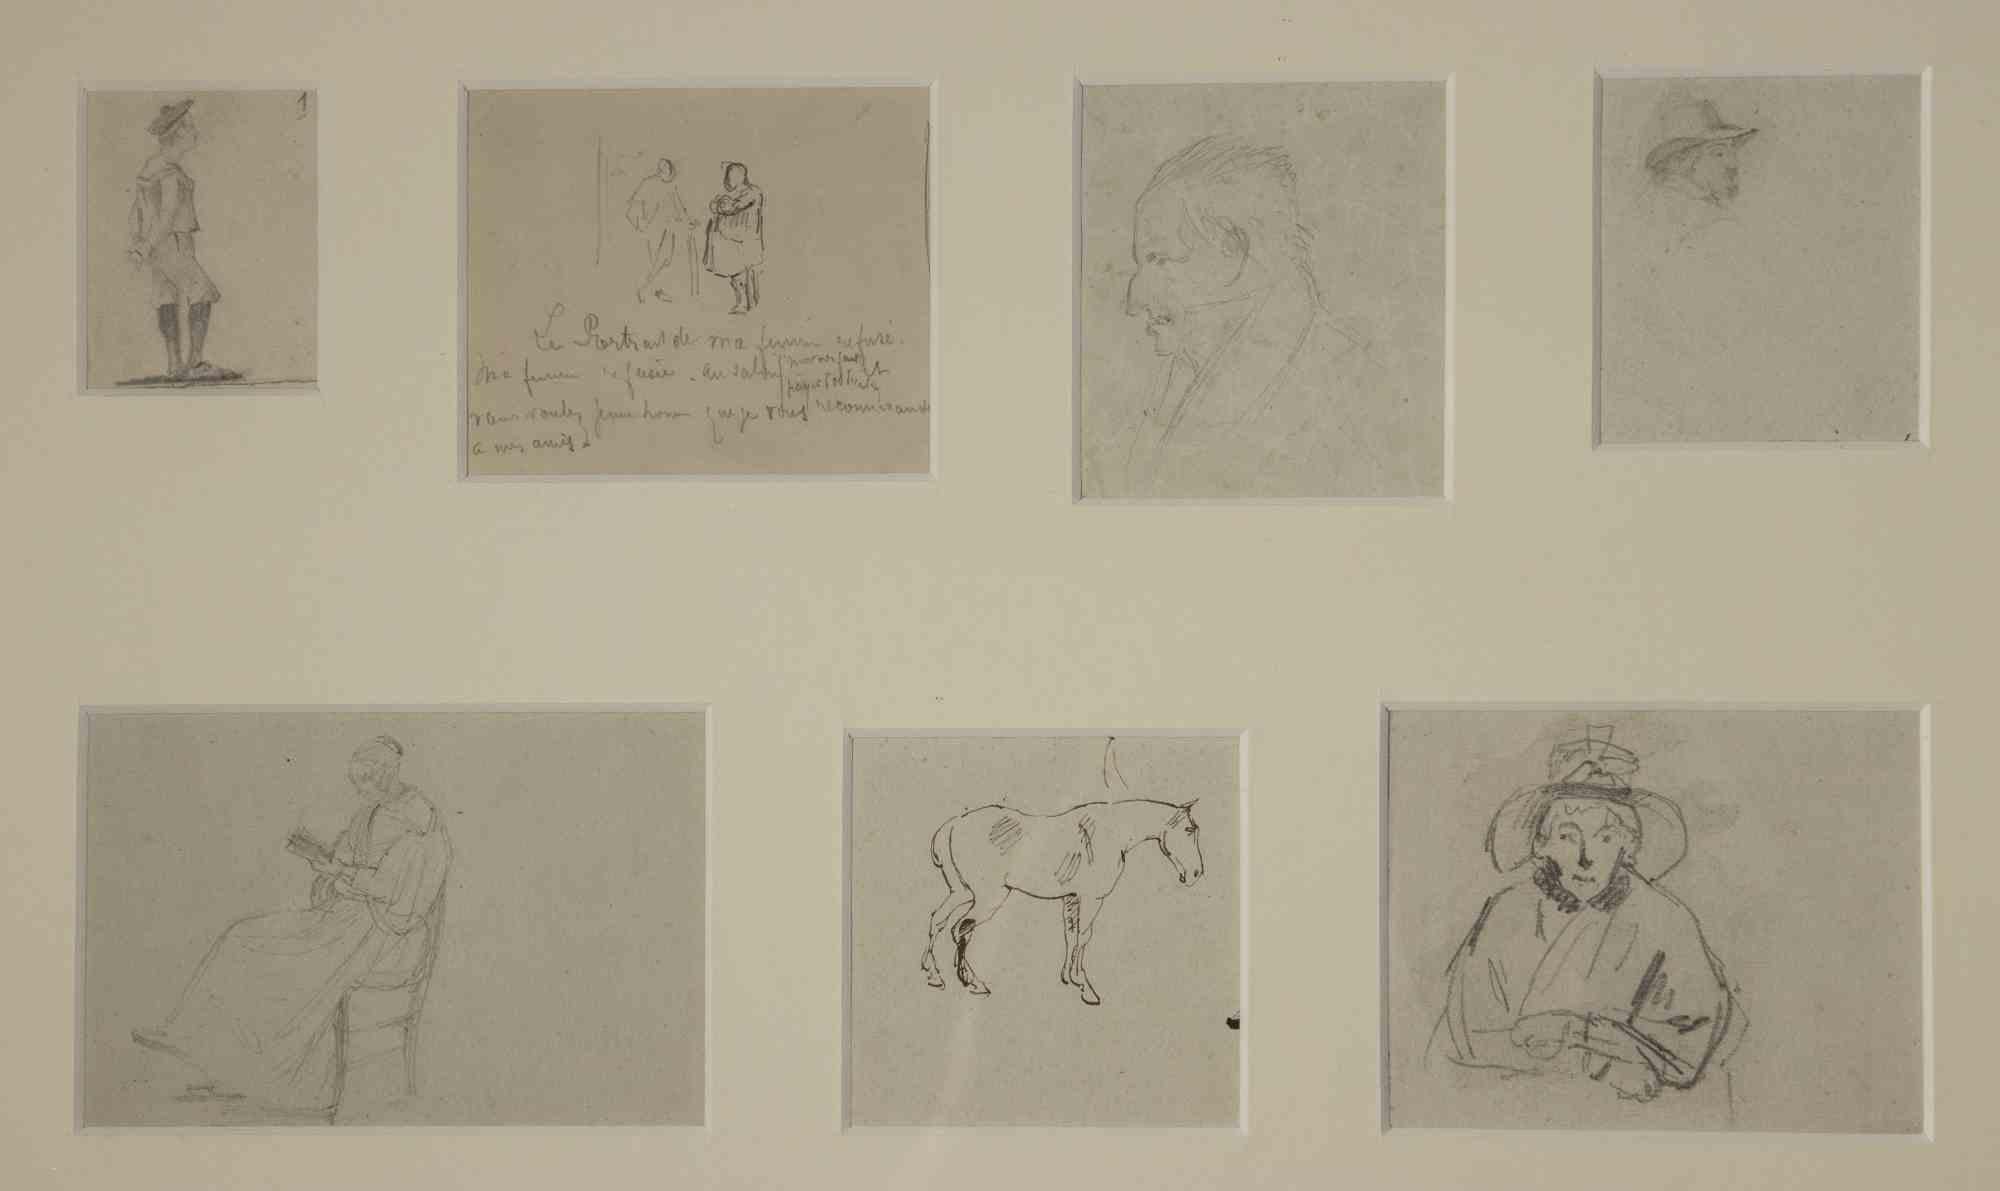 Unknown Figurative Art - Study of Figures - Original Drawing - Early 20th Century